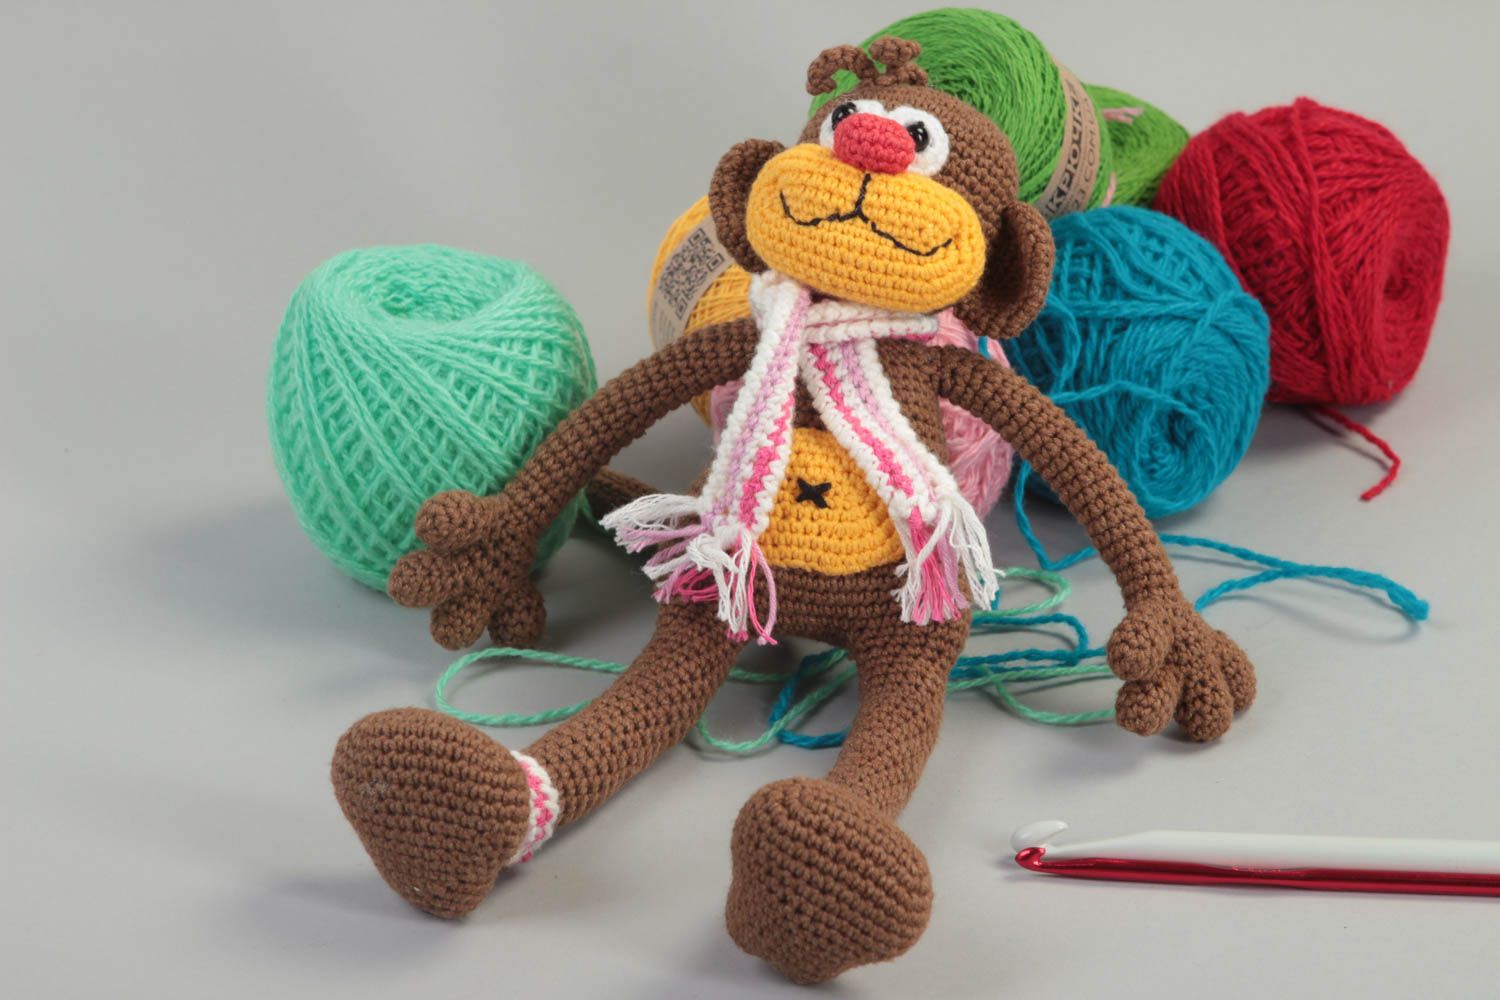 Cute handmade childrens toys crochet soft toy stuffed monkey toy gifts for kids photo 1